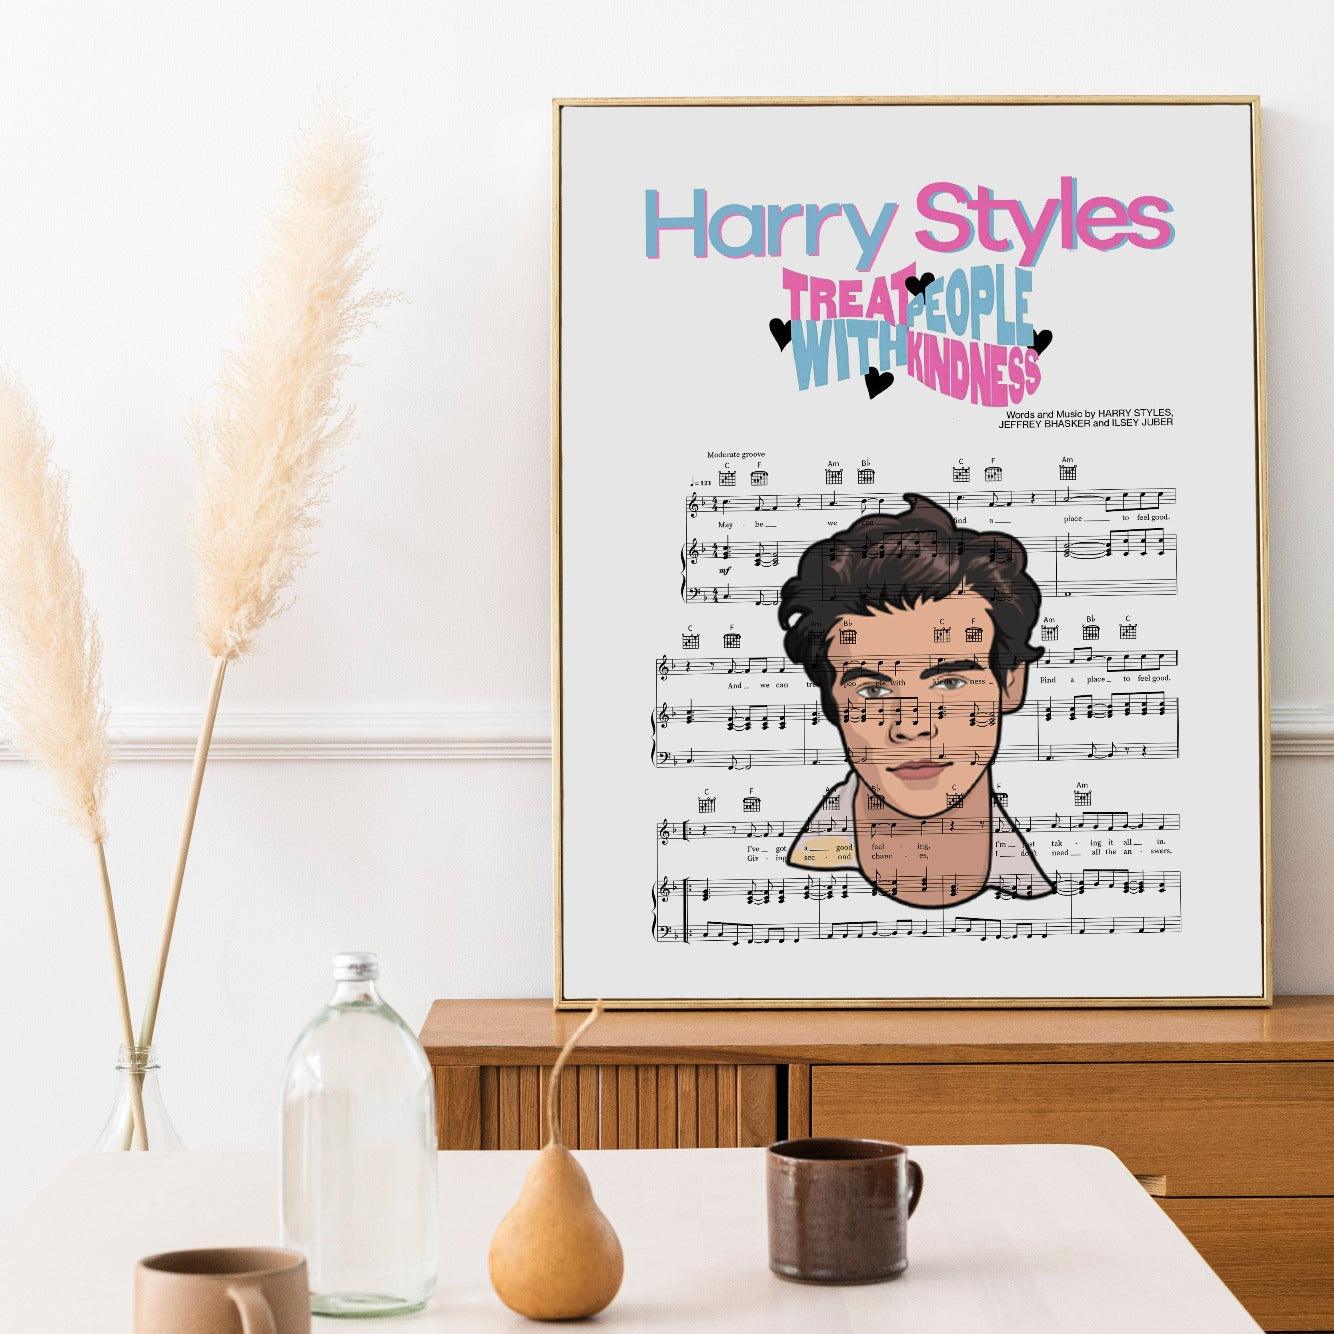 98Types Music have just released their latest Print, Treat people with kindness by Harry Styles. This stylish poster is inspired by the song lyrics and makes a great addition to any music fan's home. Printed on high quality paper, this poster is perfect for framing and will look great on any wall.